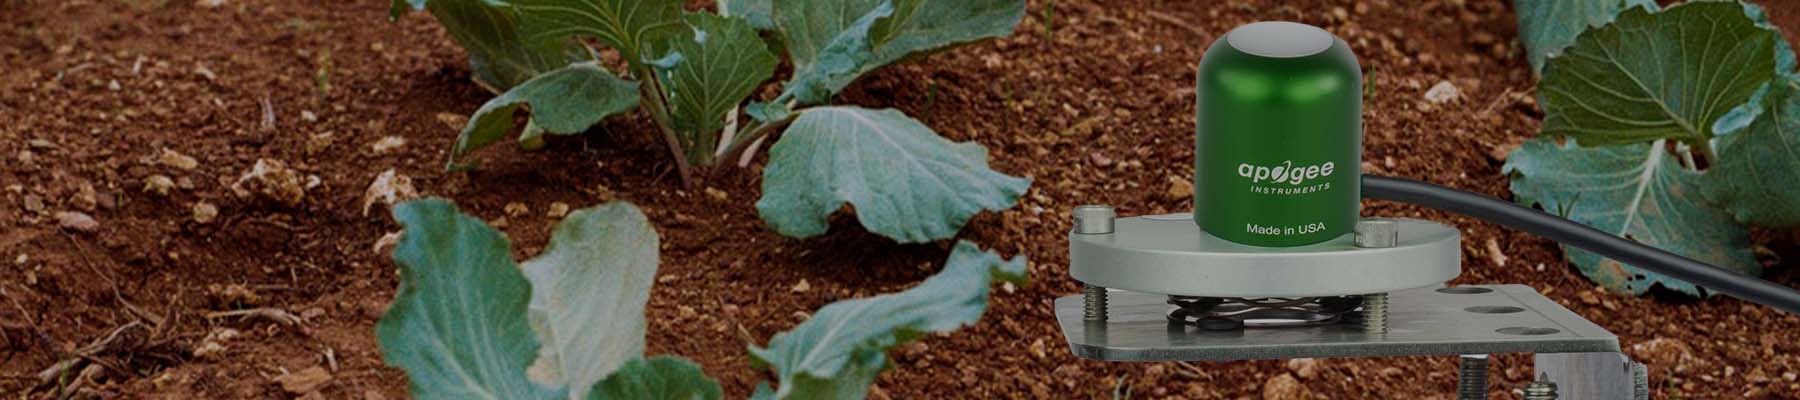 Apogee offers two types of two-band radiometers to inform environment and plant health; NDVI and PRI sensors.